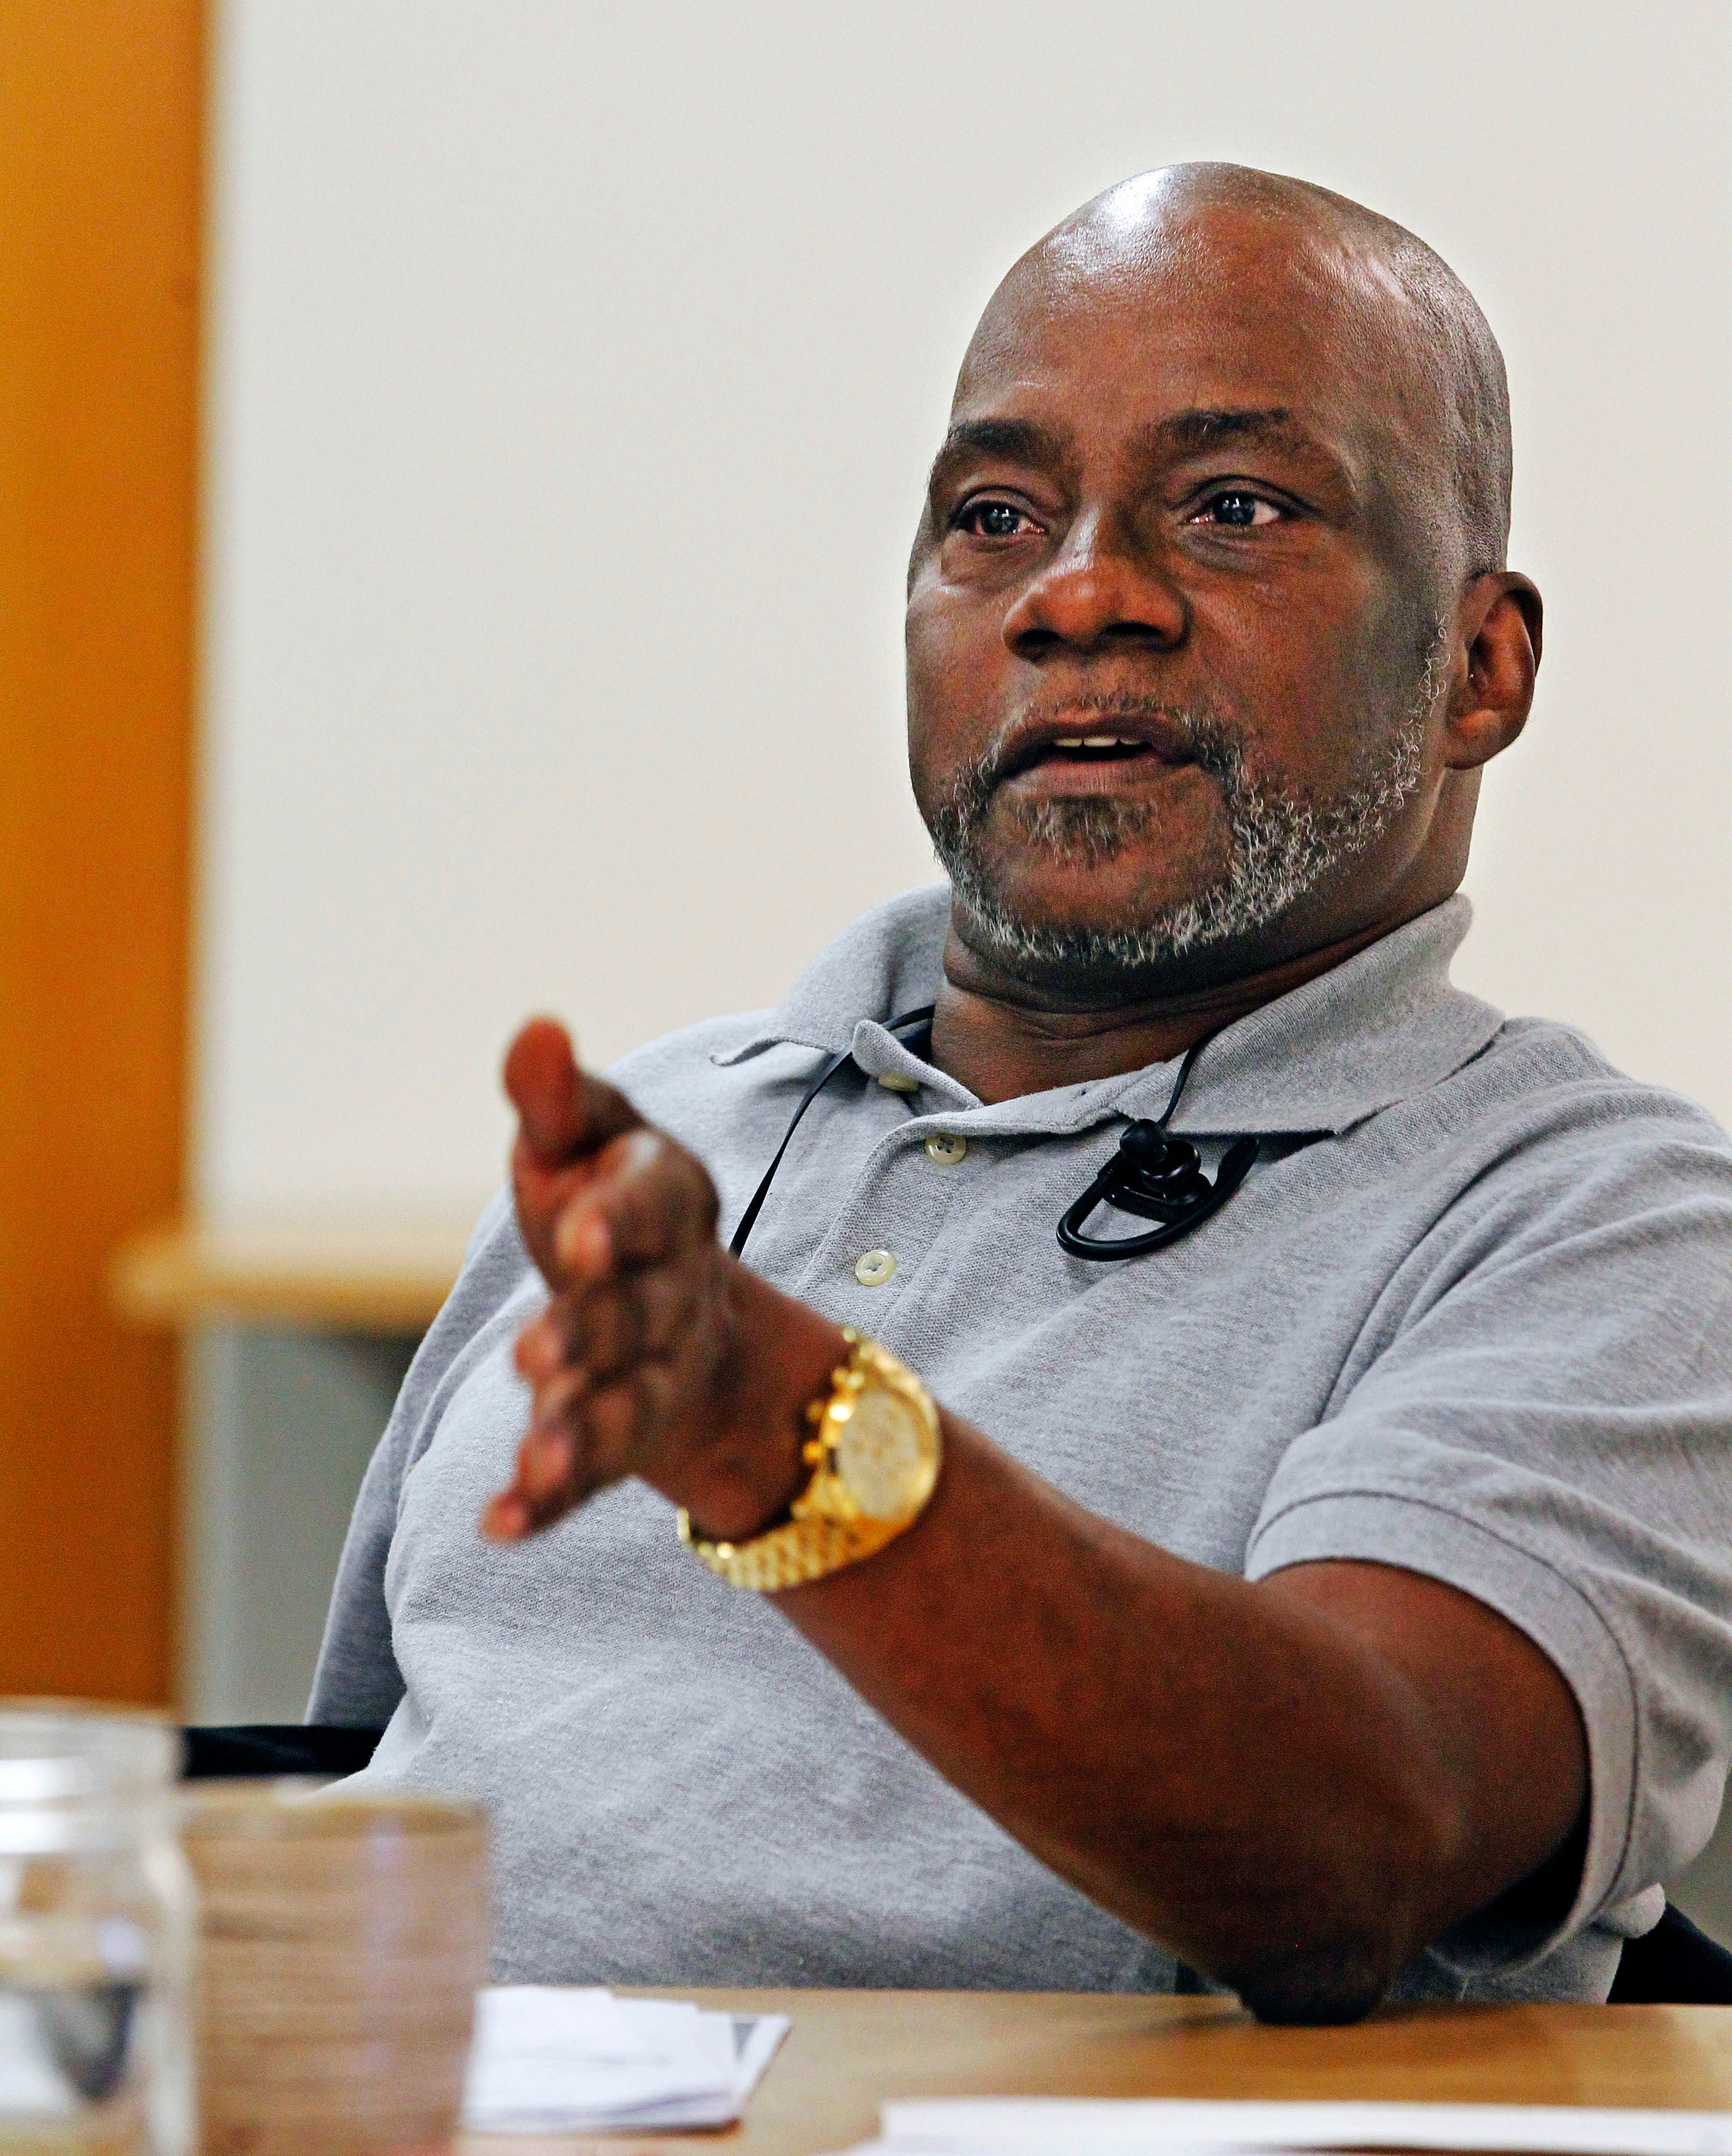 Randy Dillard is one of the leaders of Community Action for Safe Apartments, a tenant organizing project in New York.